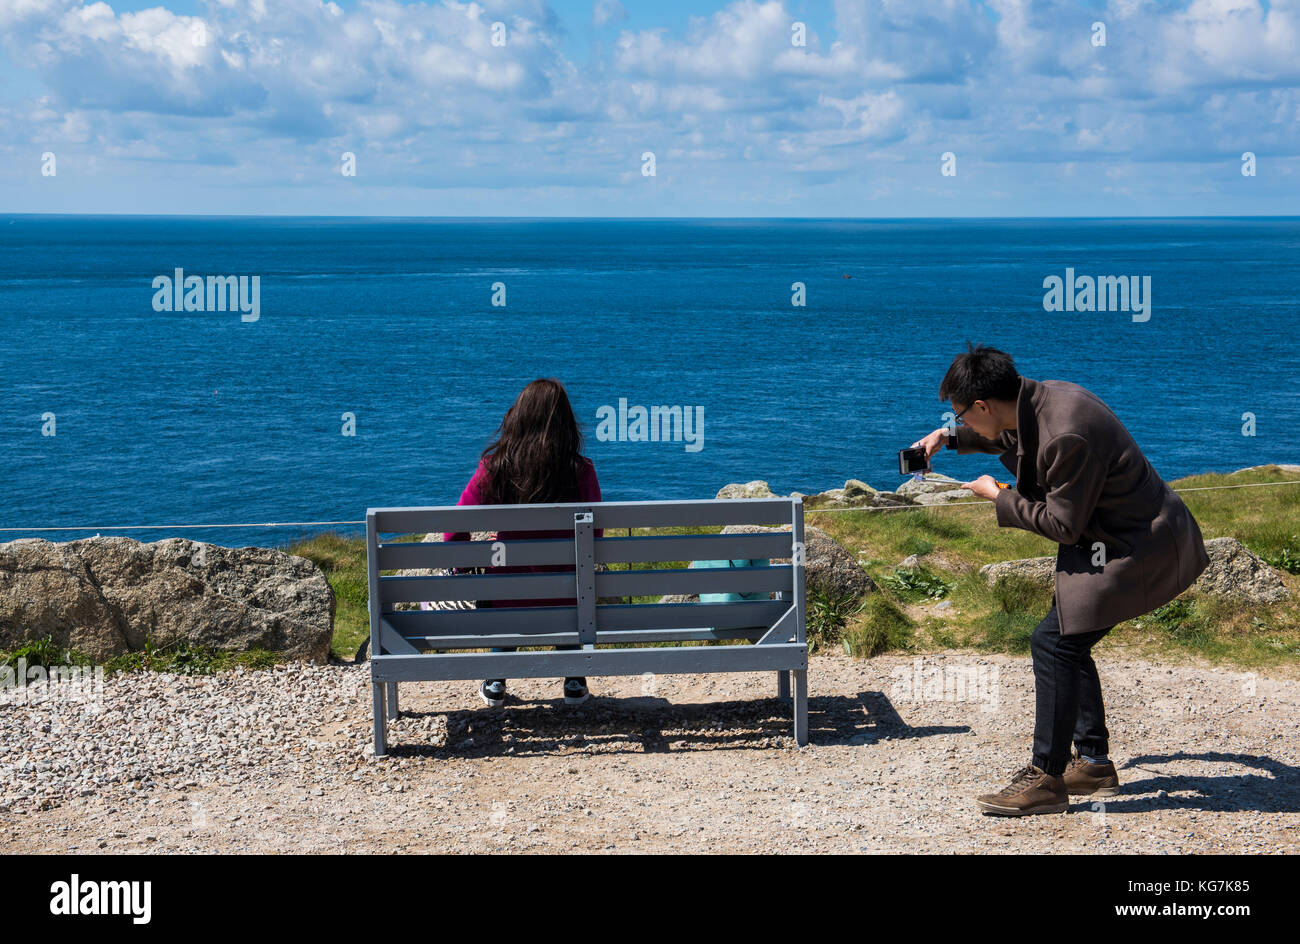 Lands' End, England - April 27, 2017: Tourists sitting on bench at Last/first house at Lands' End in summer taking pictures with phone. Stock Photo